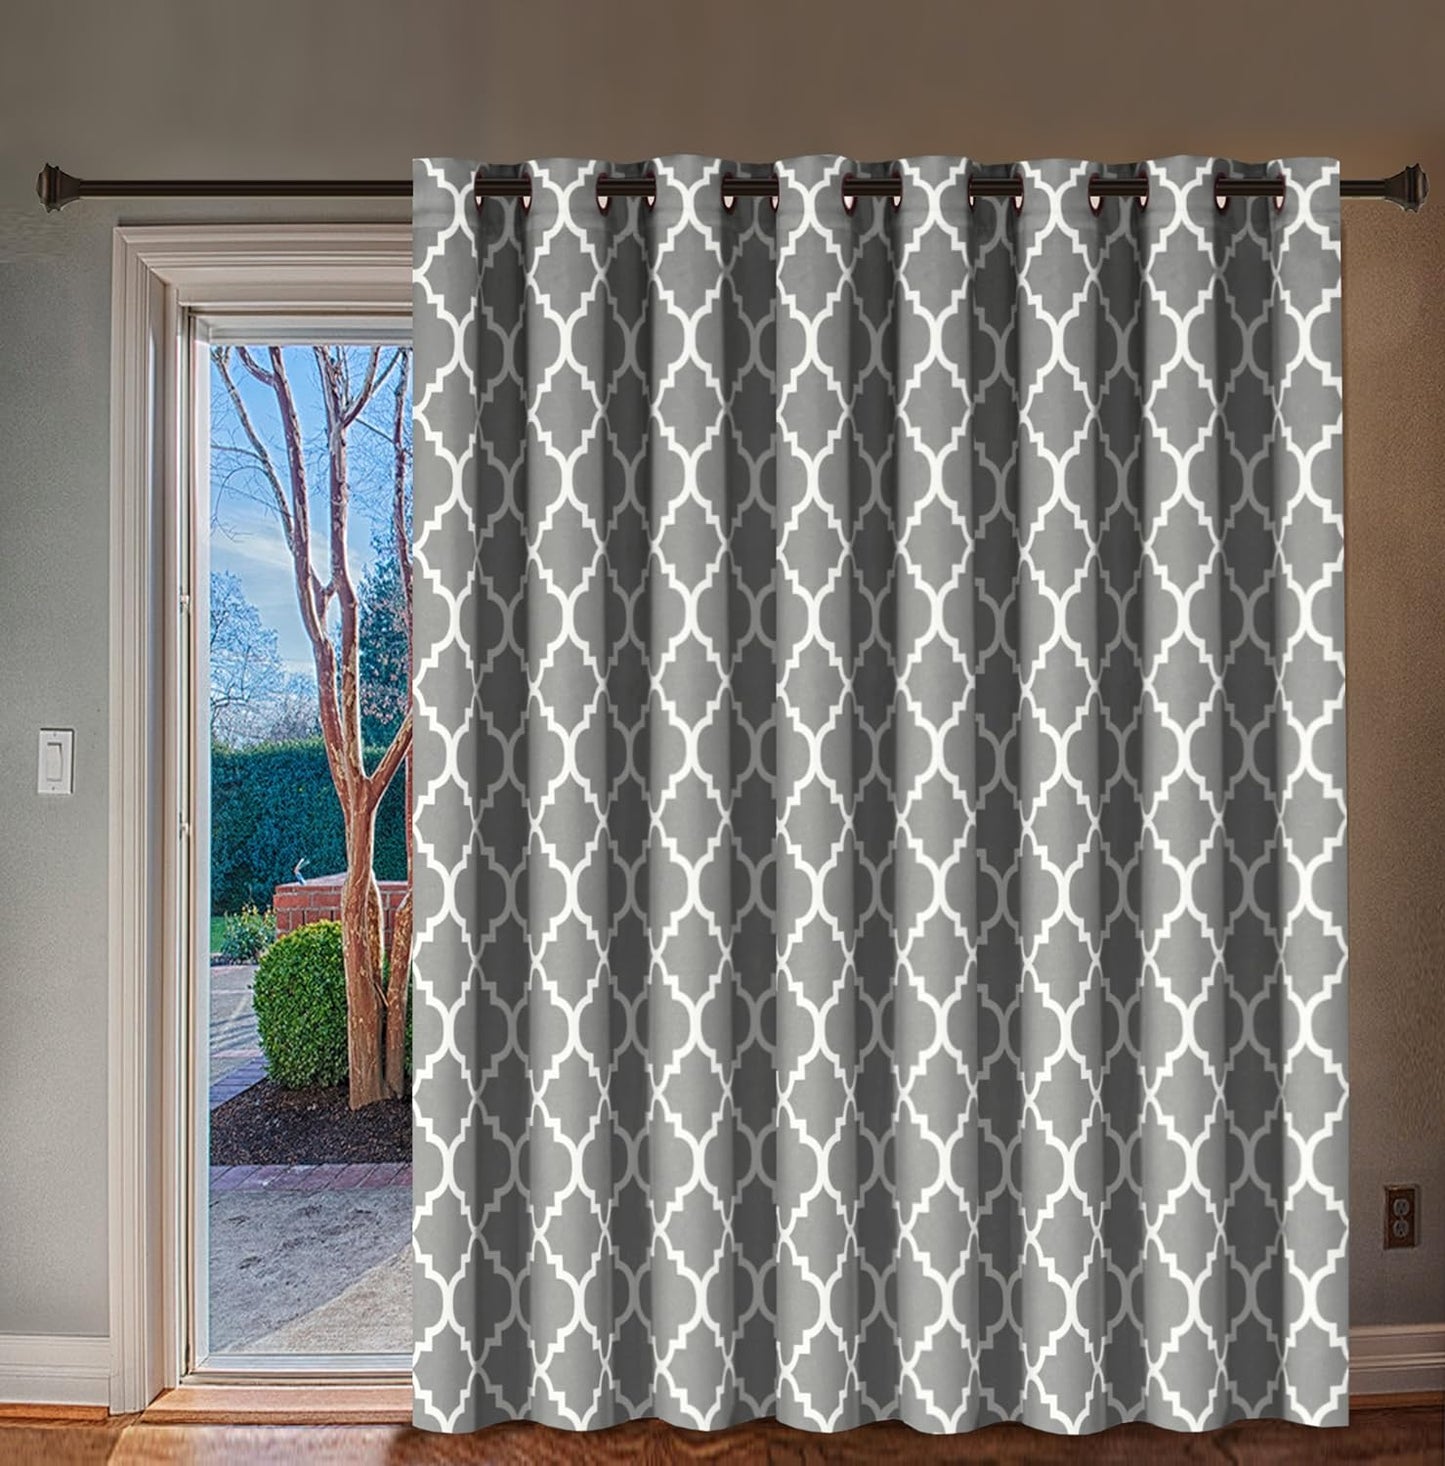 H.VERSAILTEX Extra Wide Blackout Curtain 100X84 Inches Thermal Insulated Curtain for Sliding Glass Door -Grommet Top Patio Door Curtain - Moroccan Tile Quatrefoil Pattern, Dove and White  H.VERSAILTEX Dove  White 100"W X 84"L 